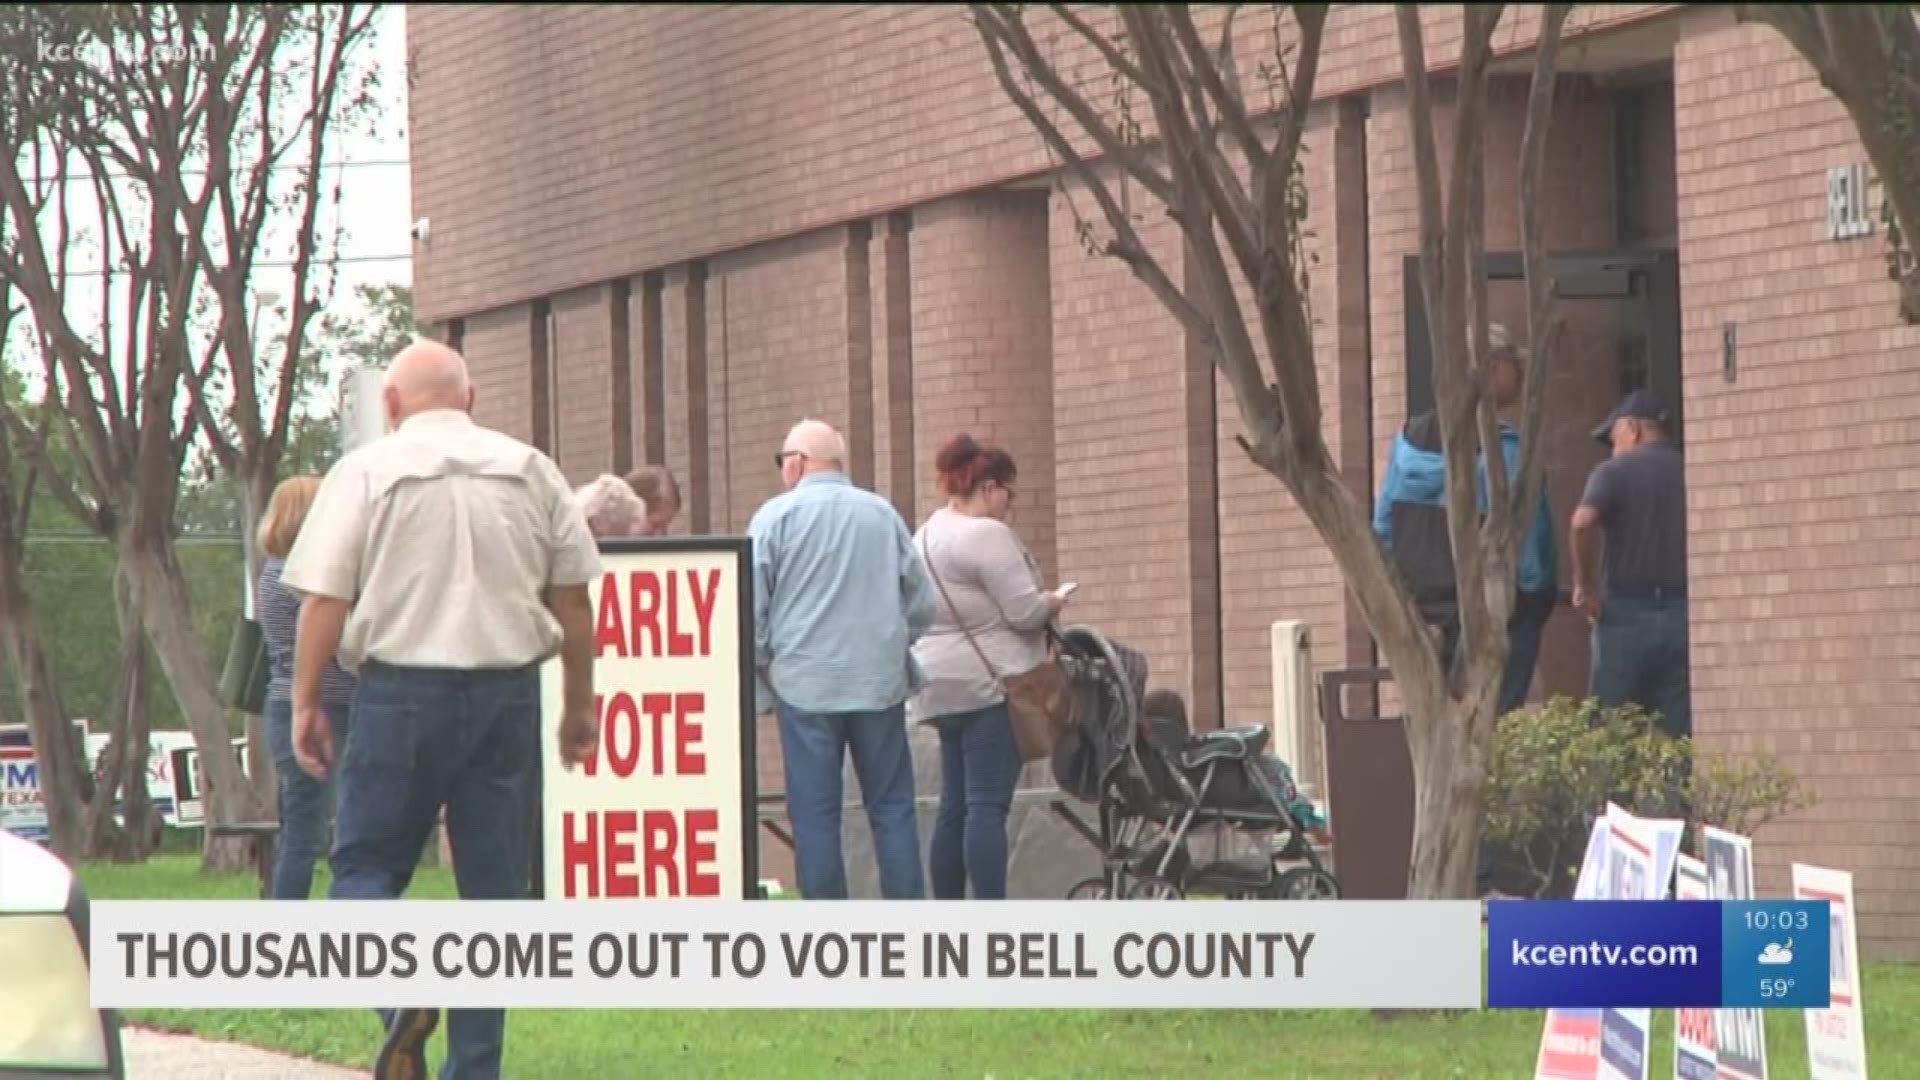 Early voting in Belton brings thousands to the ballots